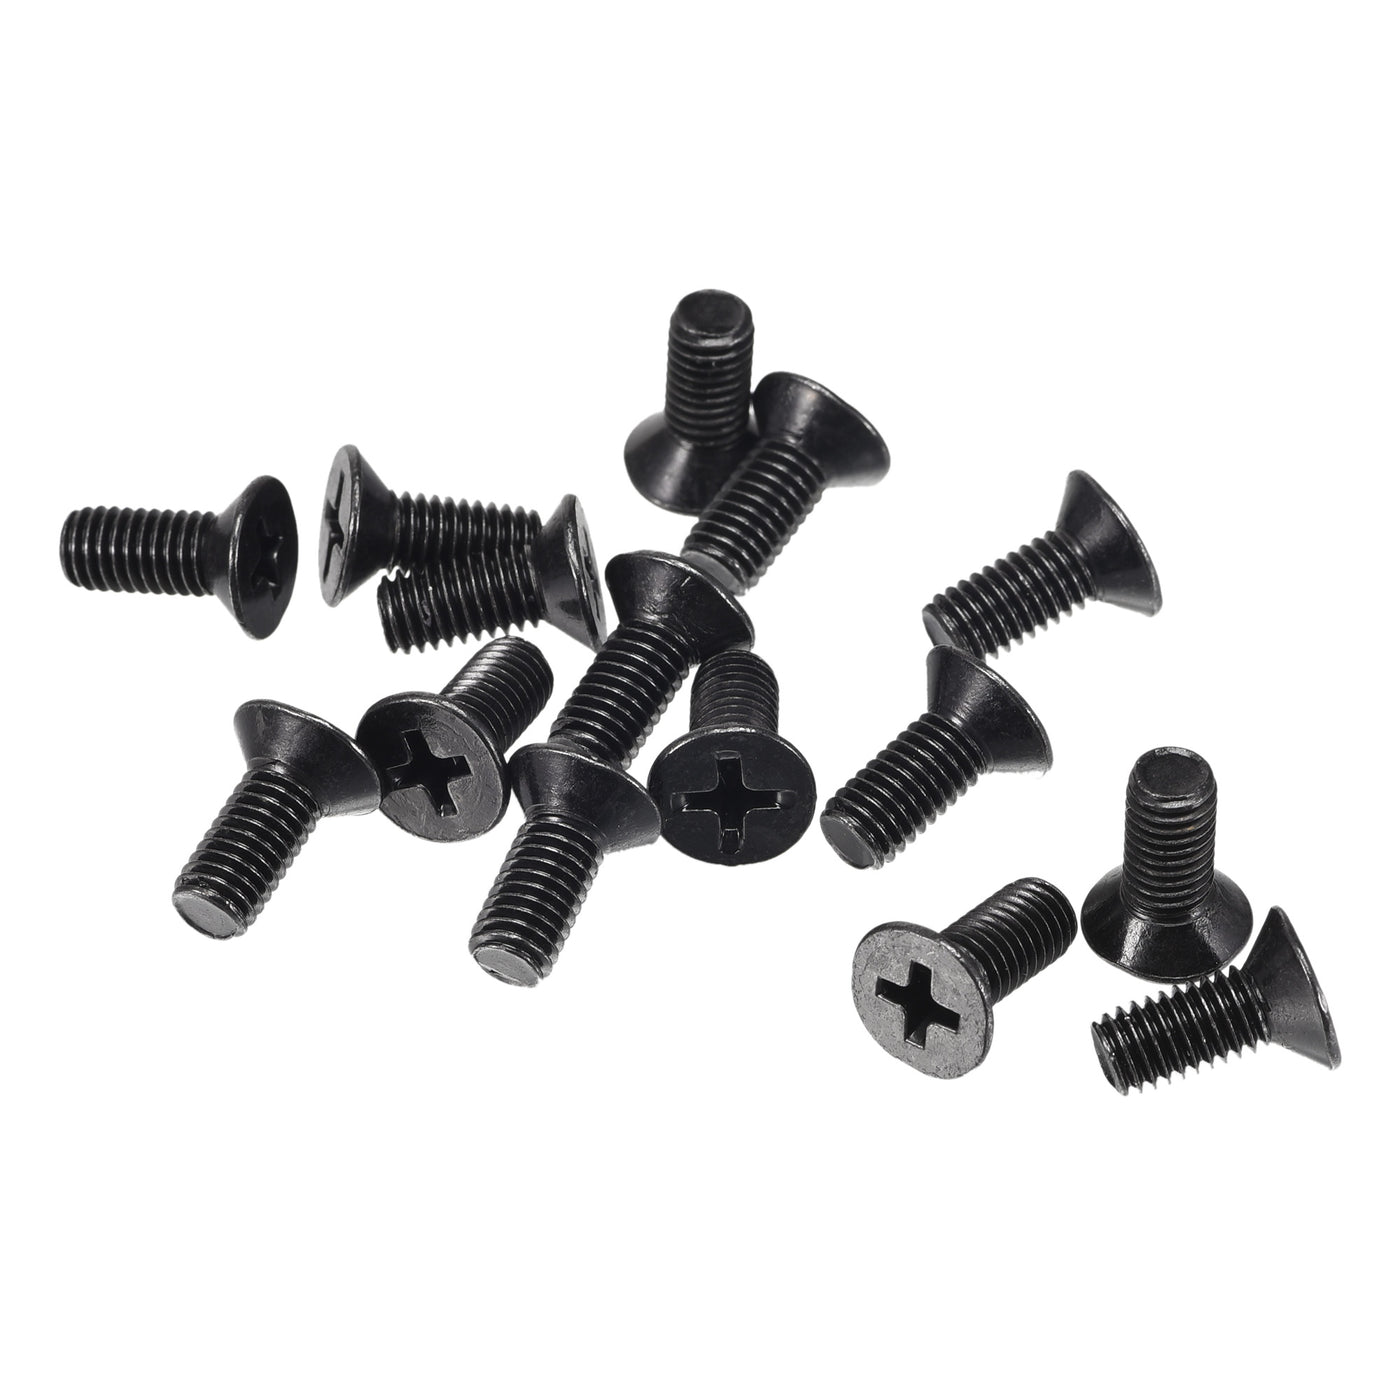 uxcell Uxcell M5 x 12mm Phillips Flat Head Screws Carbon Steel Machine Screws Black for Home Office Computer Case Appliance Equipment 50pcs